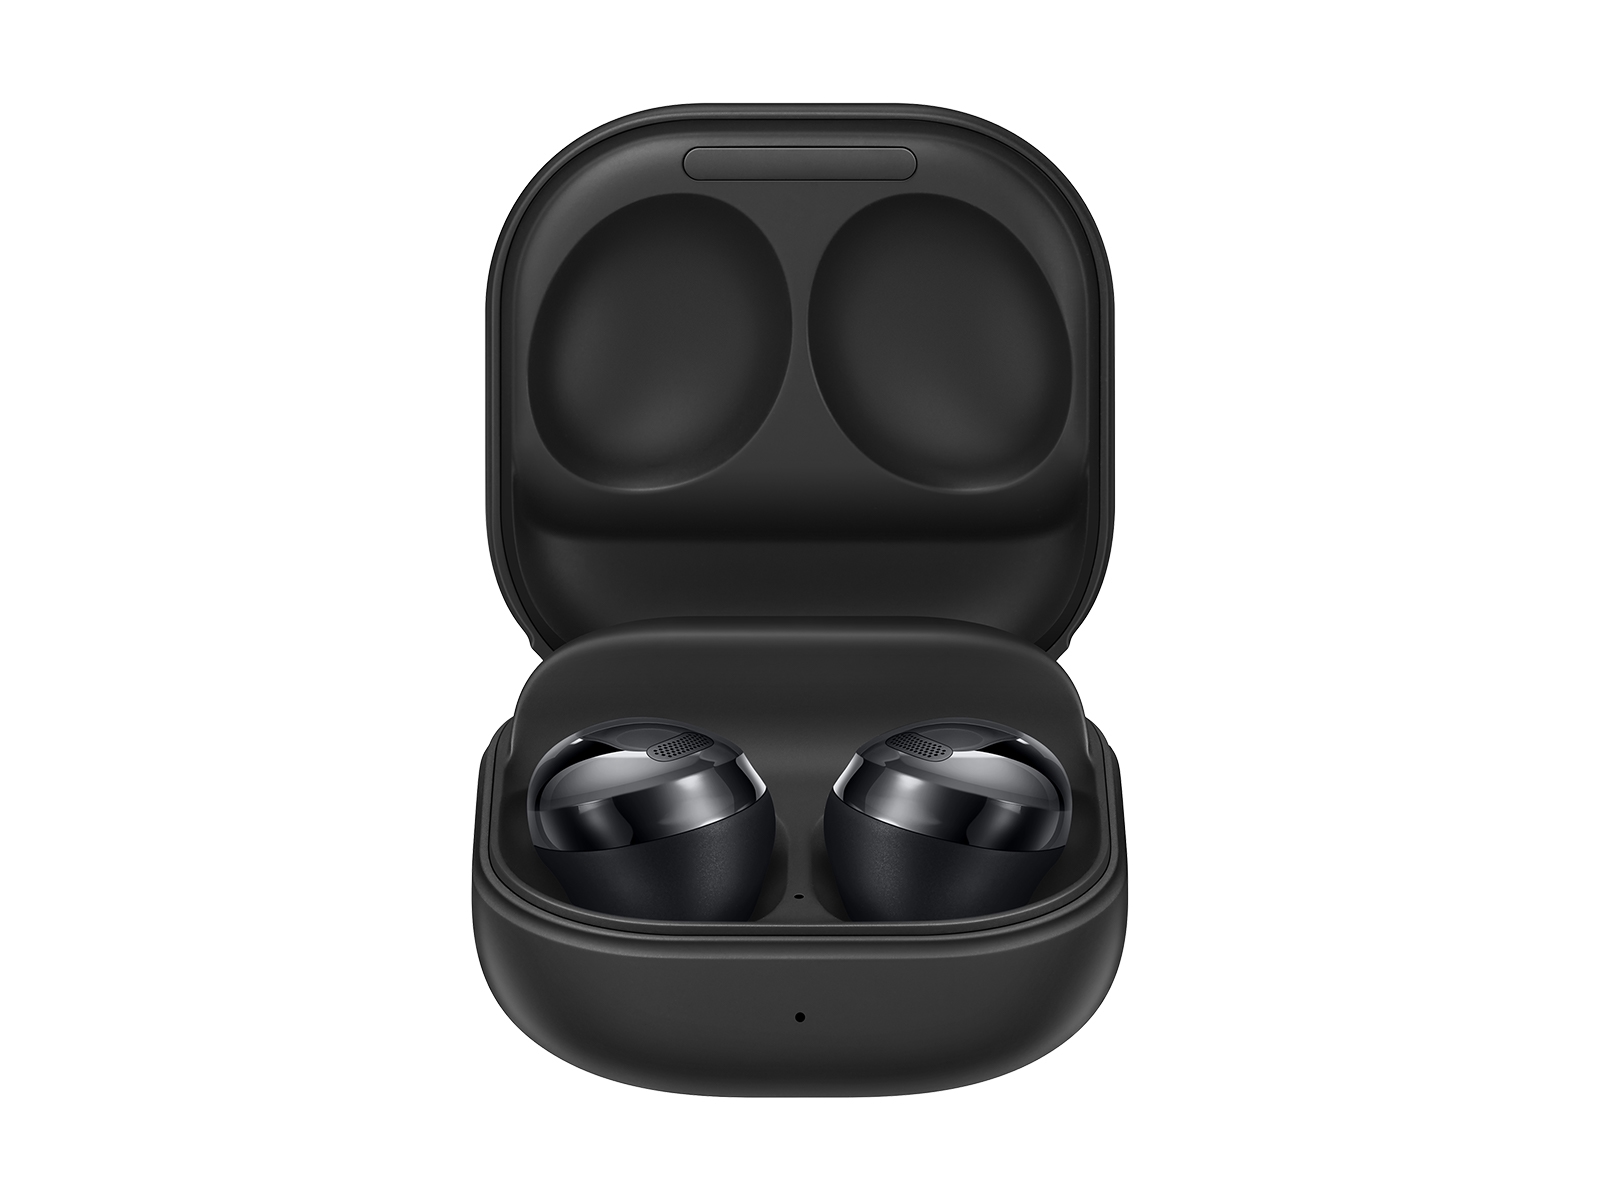 How to control the volume on Galaxy Buds Pro with touch gestures